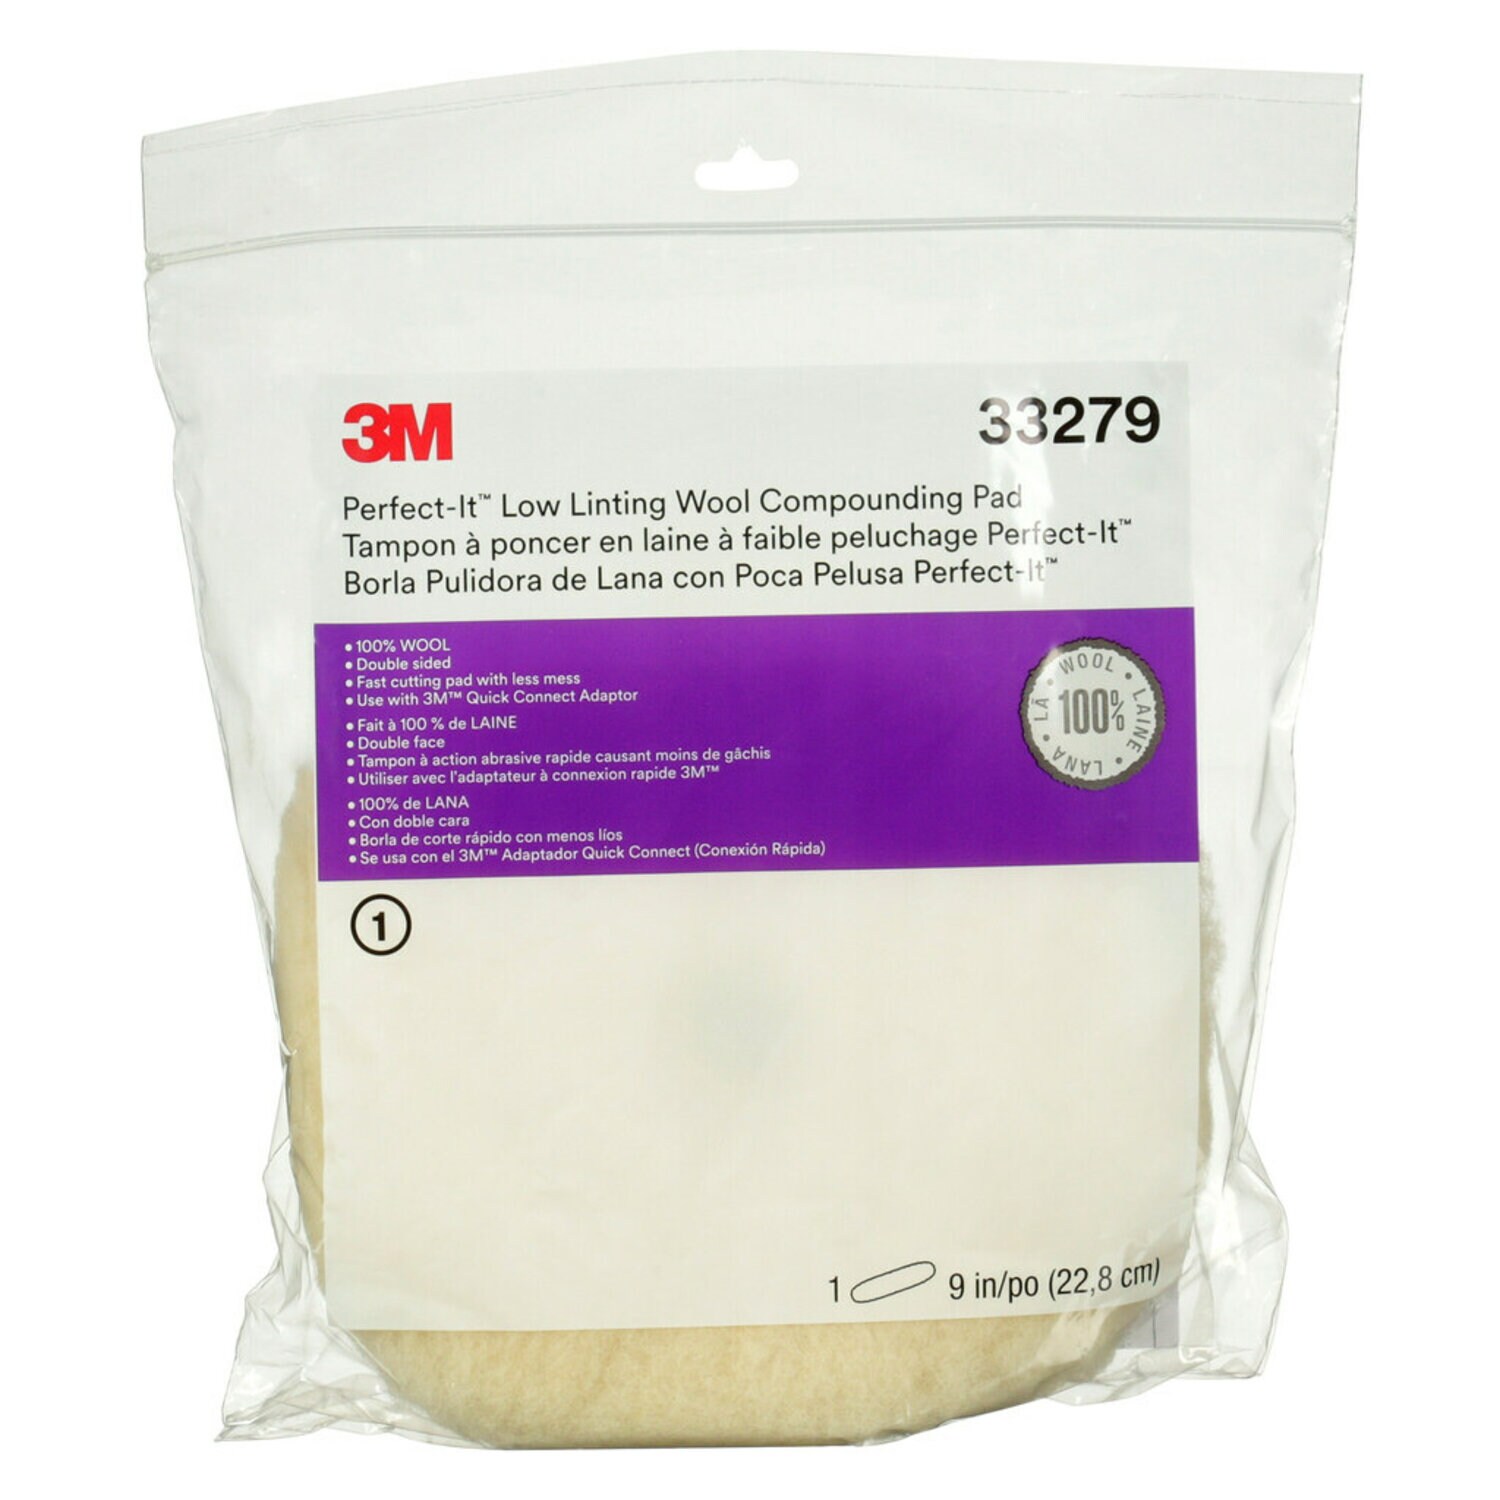 7100145353 - 3M Perfect-It Low Linting Wool Compounding Pad, 33279, 9 in, 6 per
case